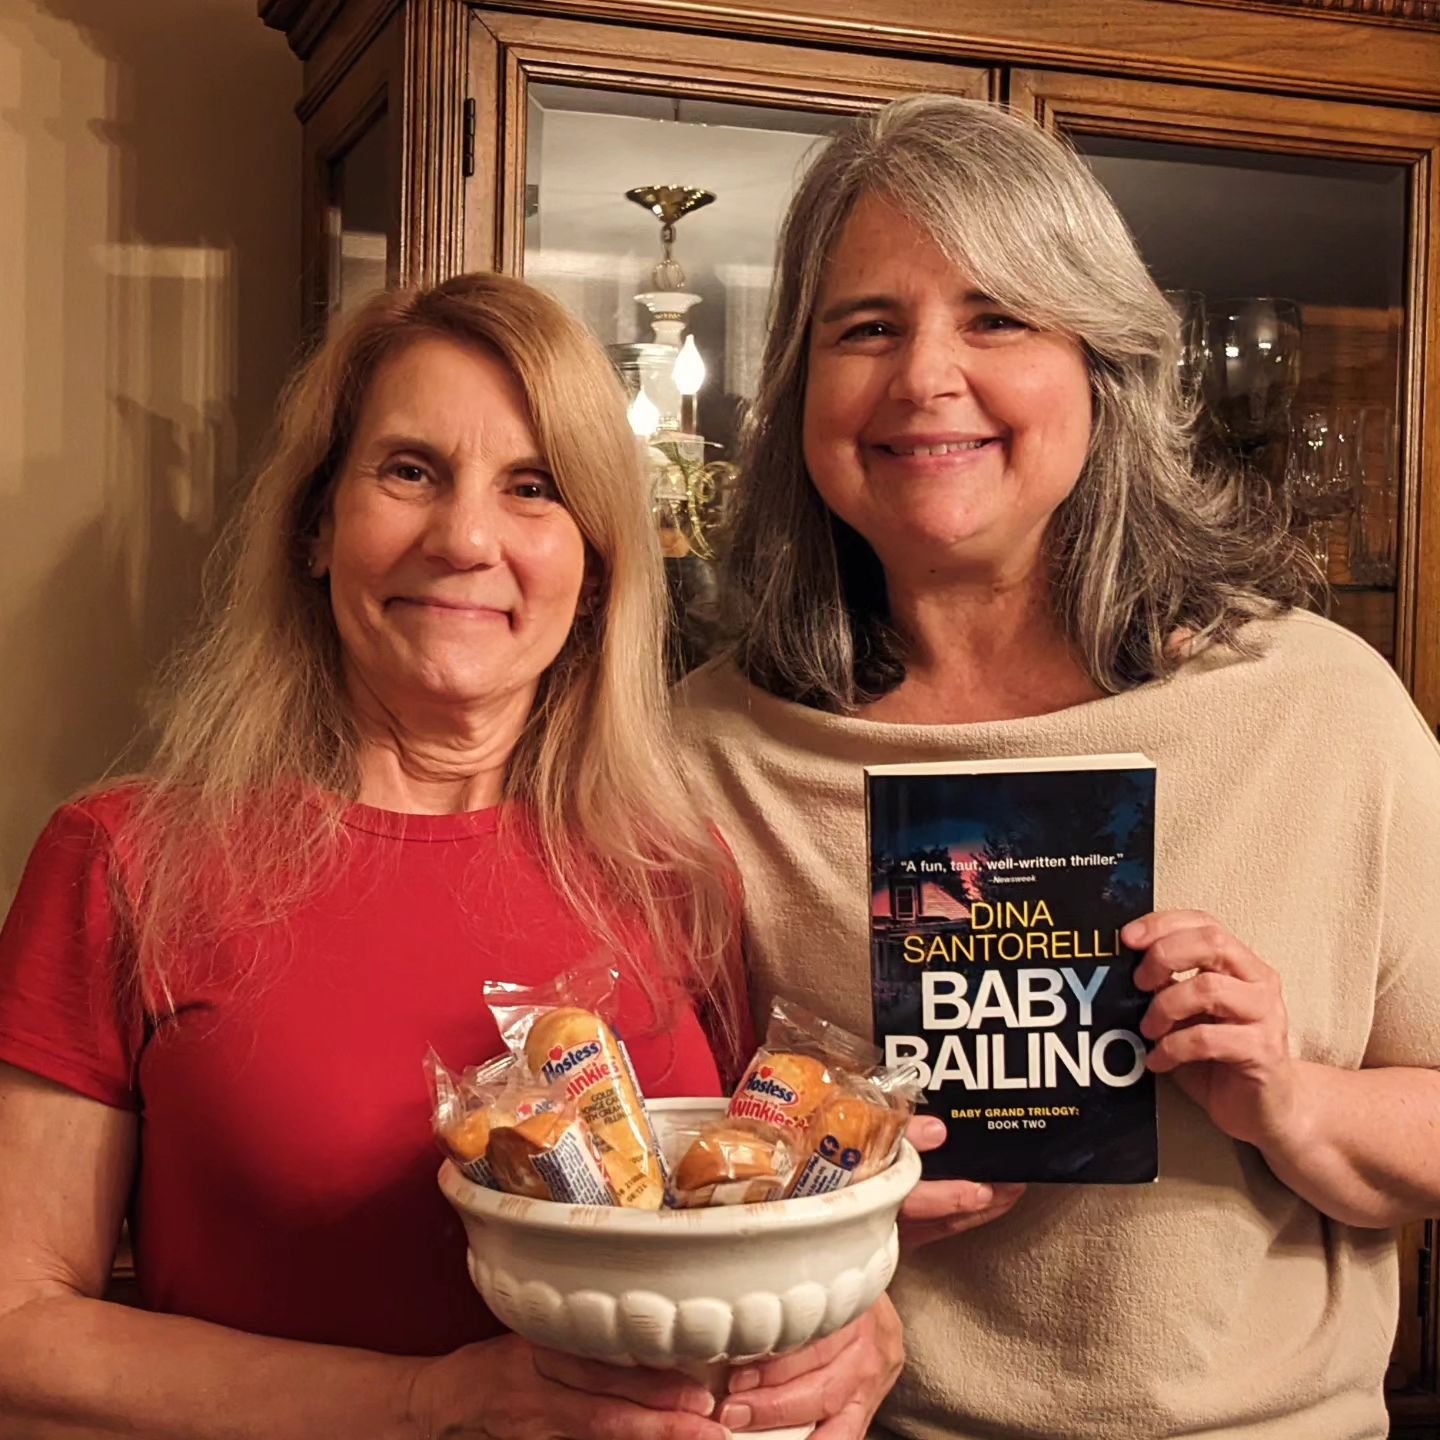 Thank you, Nancy, for inviting me to your wonderful book club to discuss Baby Bailino! What a lovely evening! A great discussion, great food (the Twinkies were the perfect touch!) and a great group of women.
.
.
.
#bookclubsofinstagram #bookclub #boo